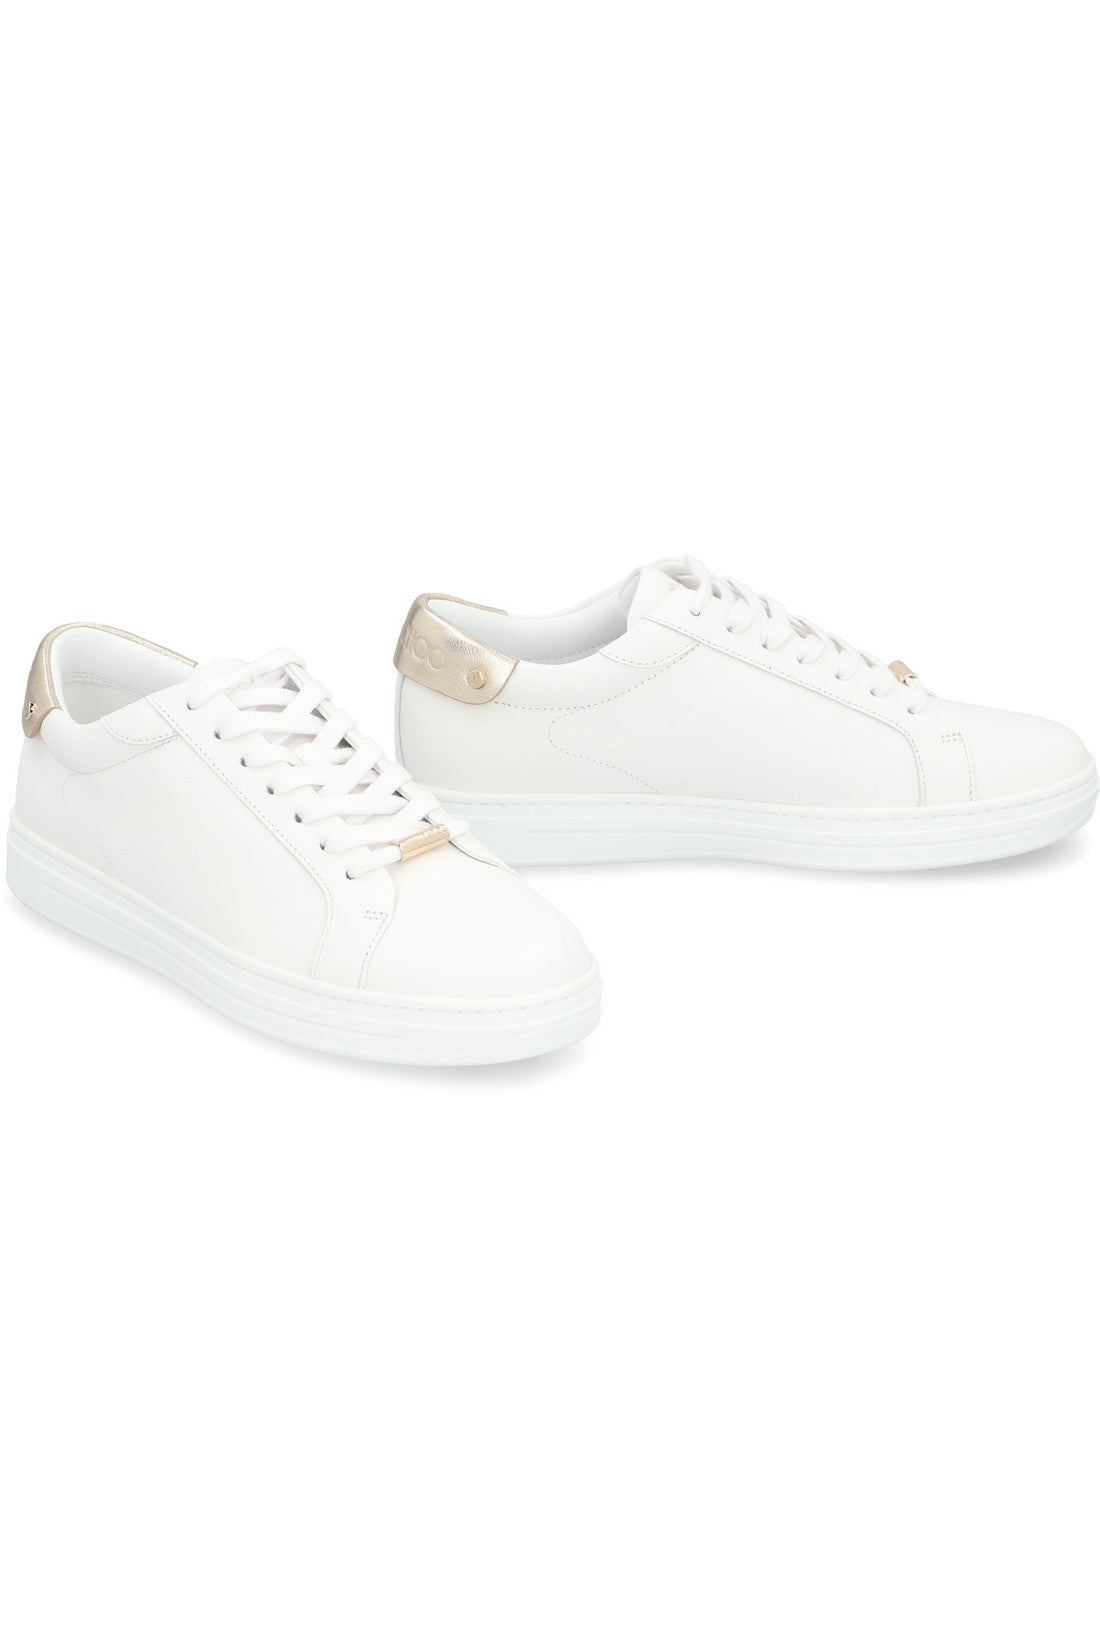 F leather sneakers-ARCHIVIST